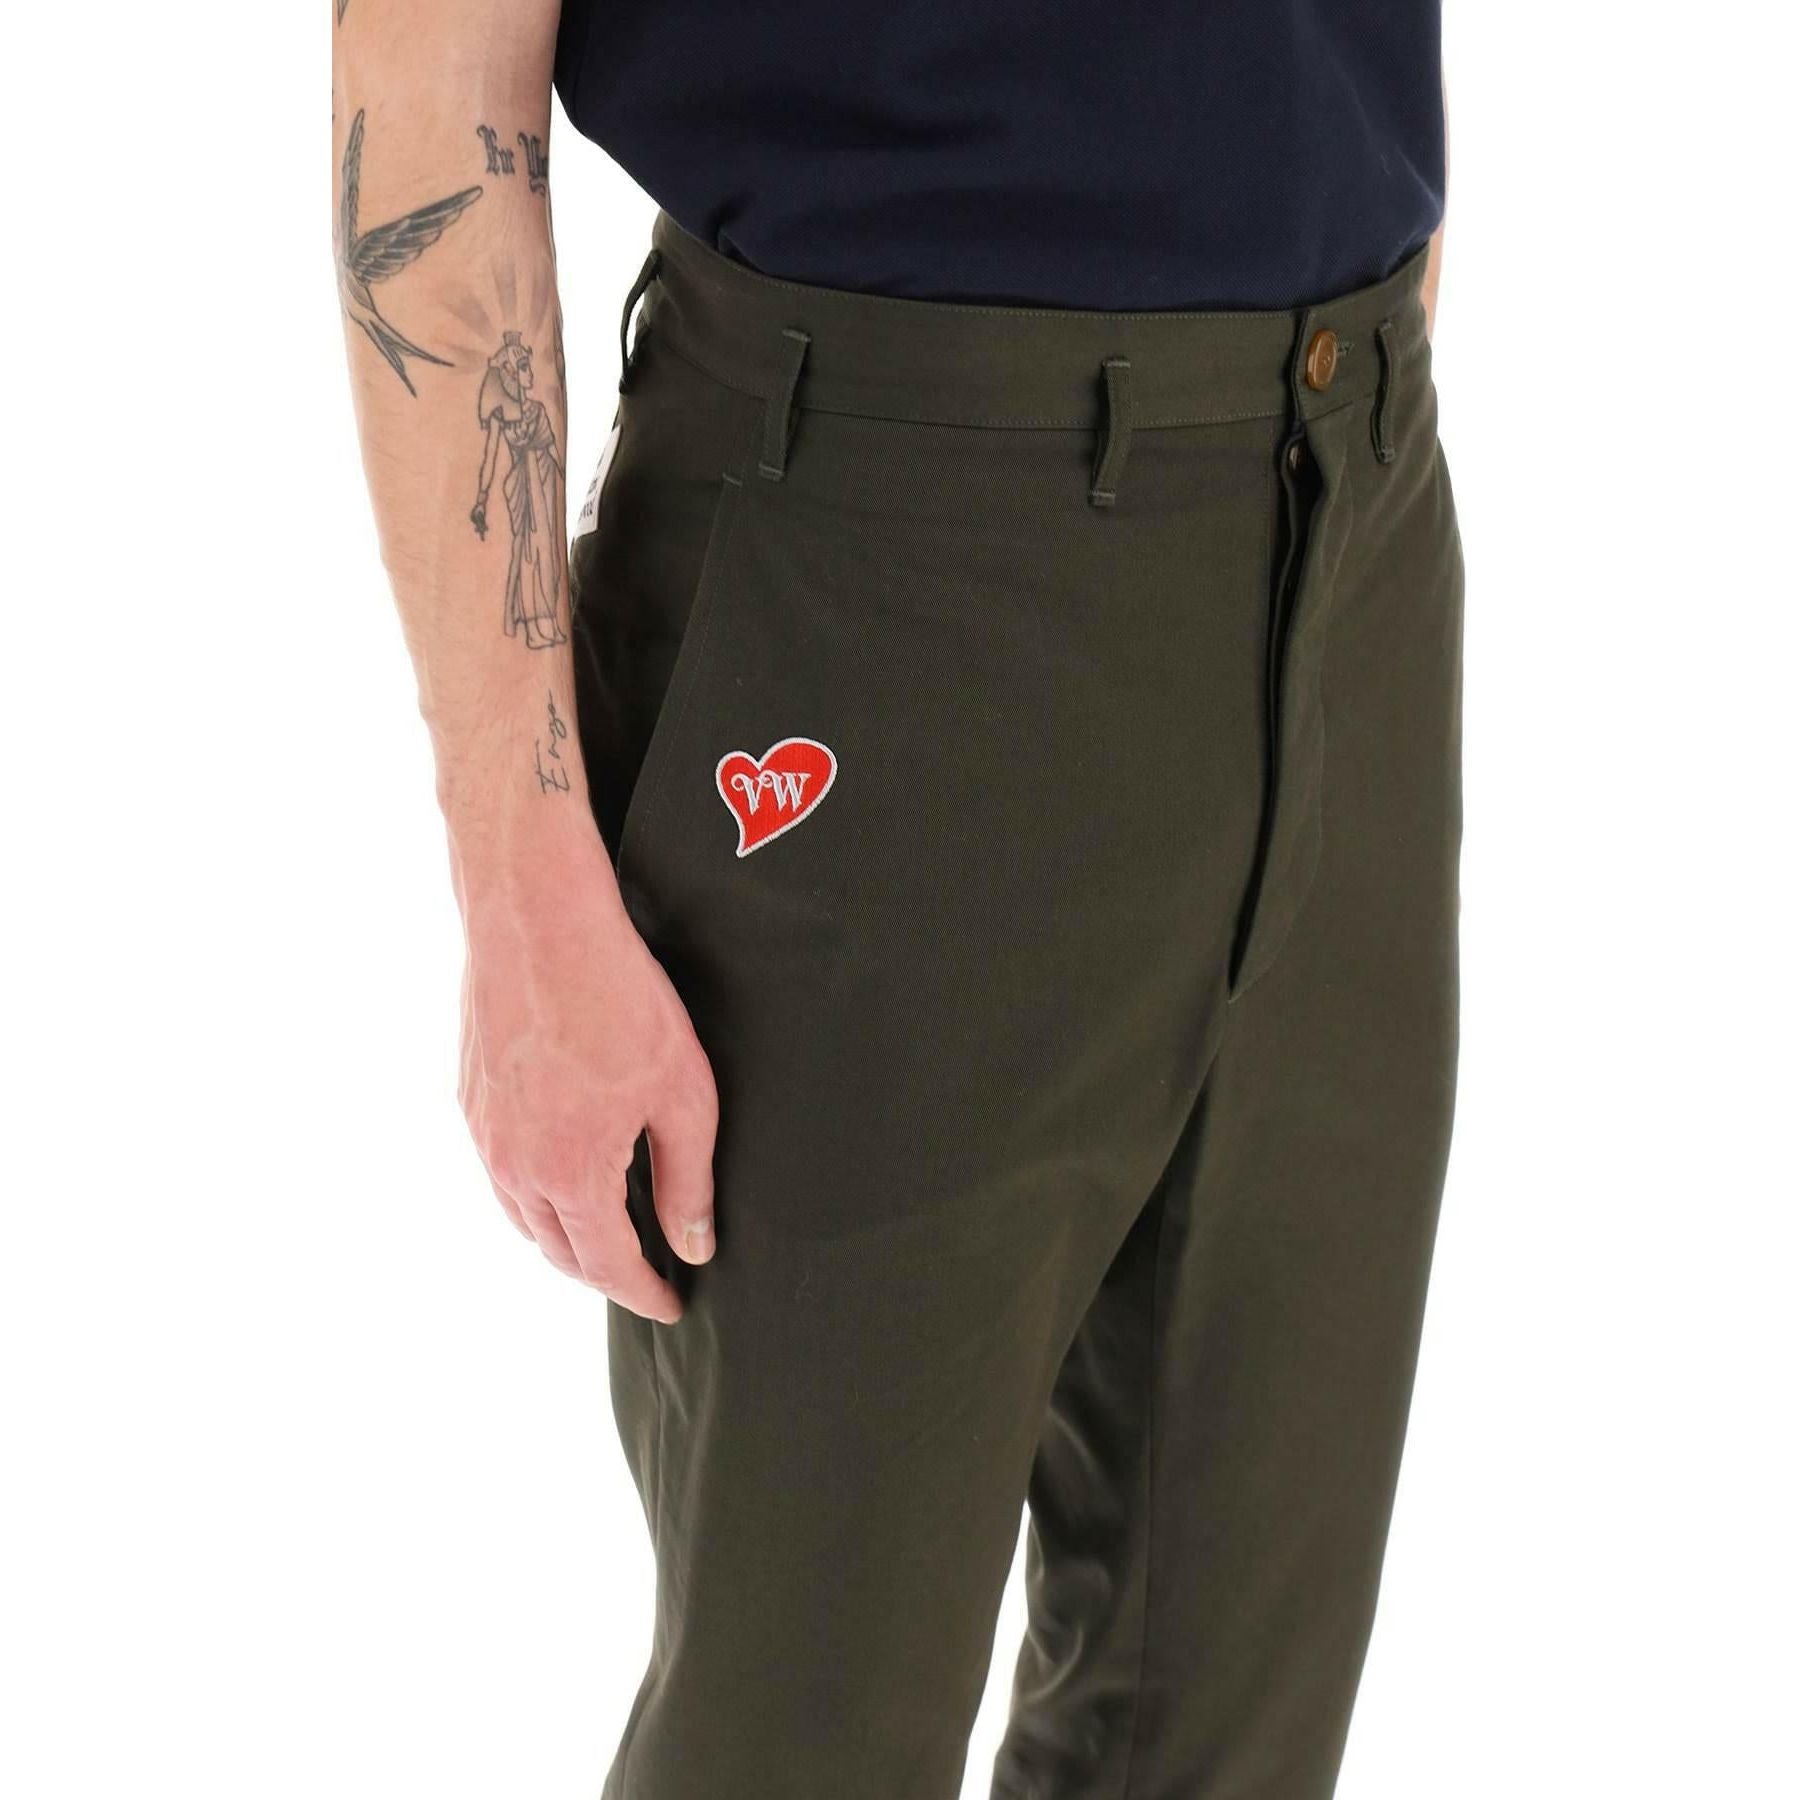 Cropped Cruise Pants Featuring Embroidered Heart Shaped Logo VIVIENNE WESTWOOD JOHN JULIA.